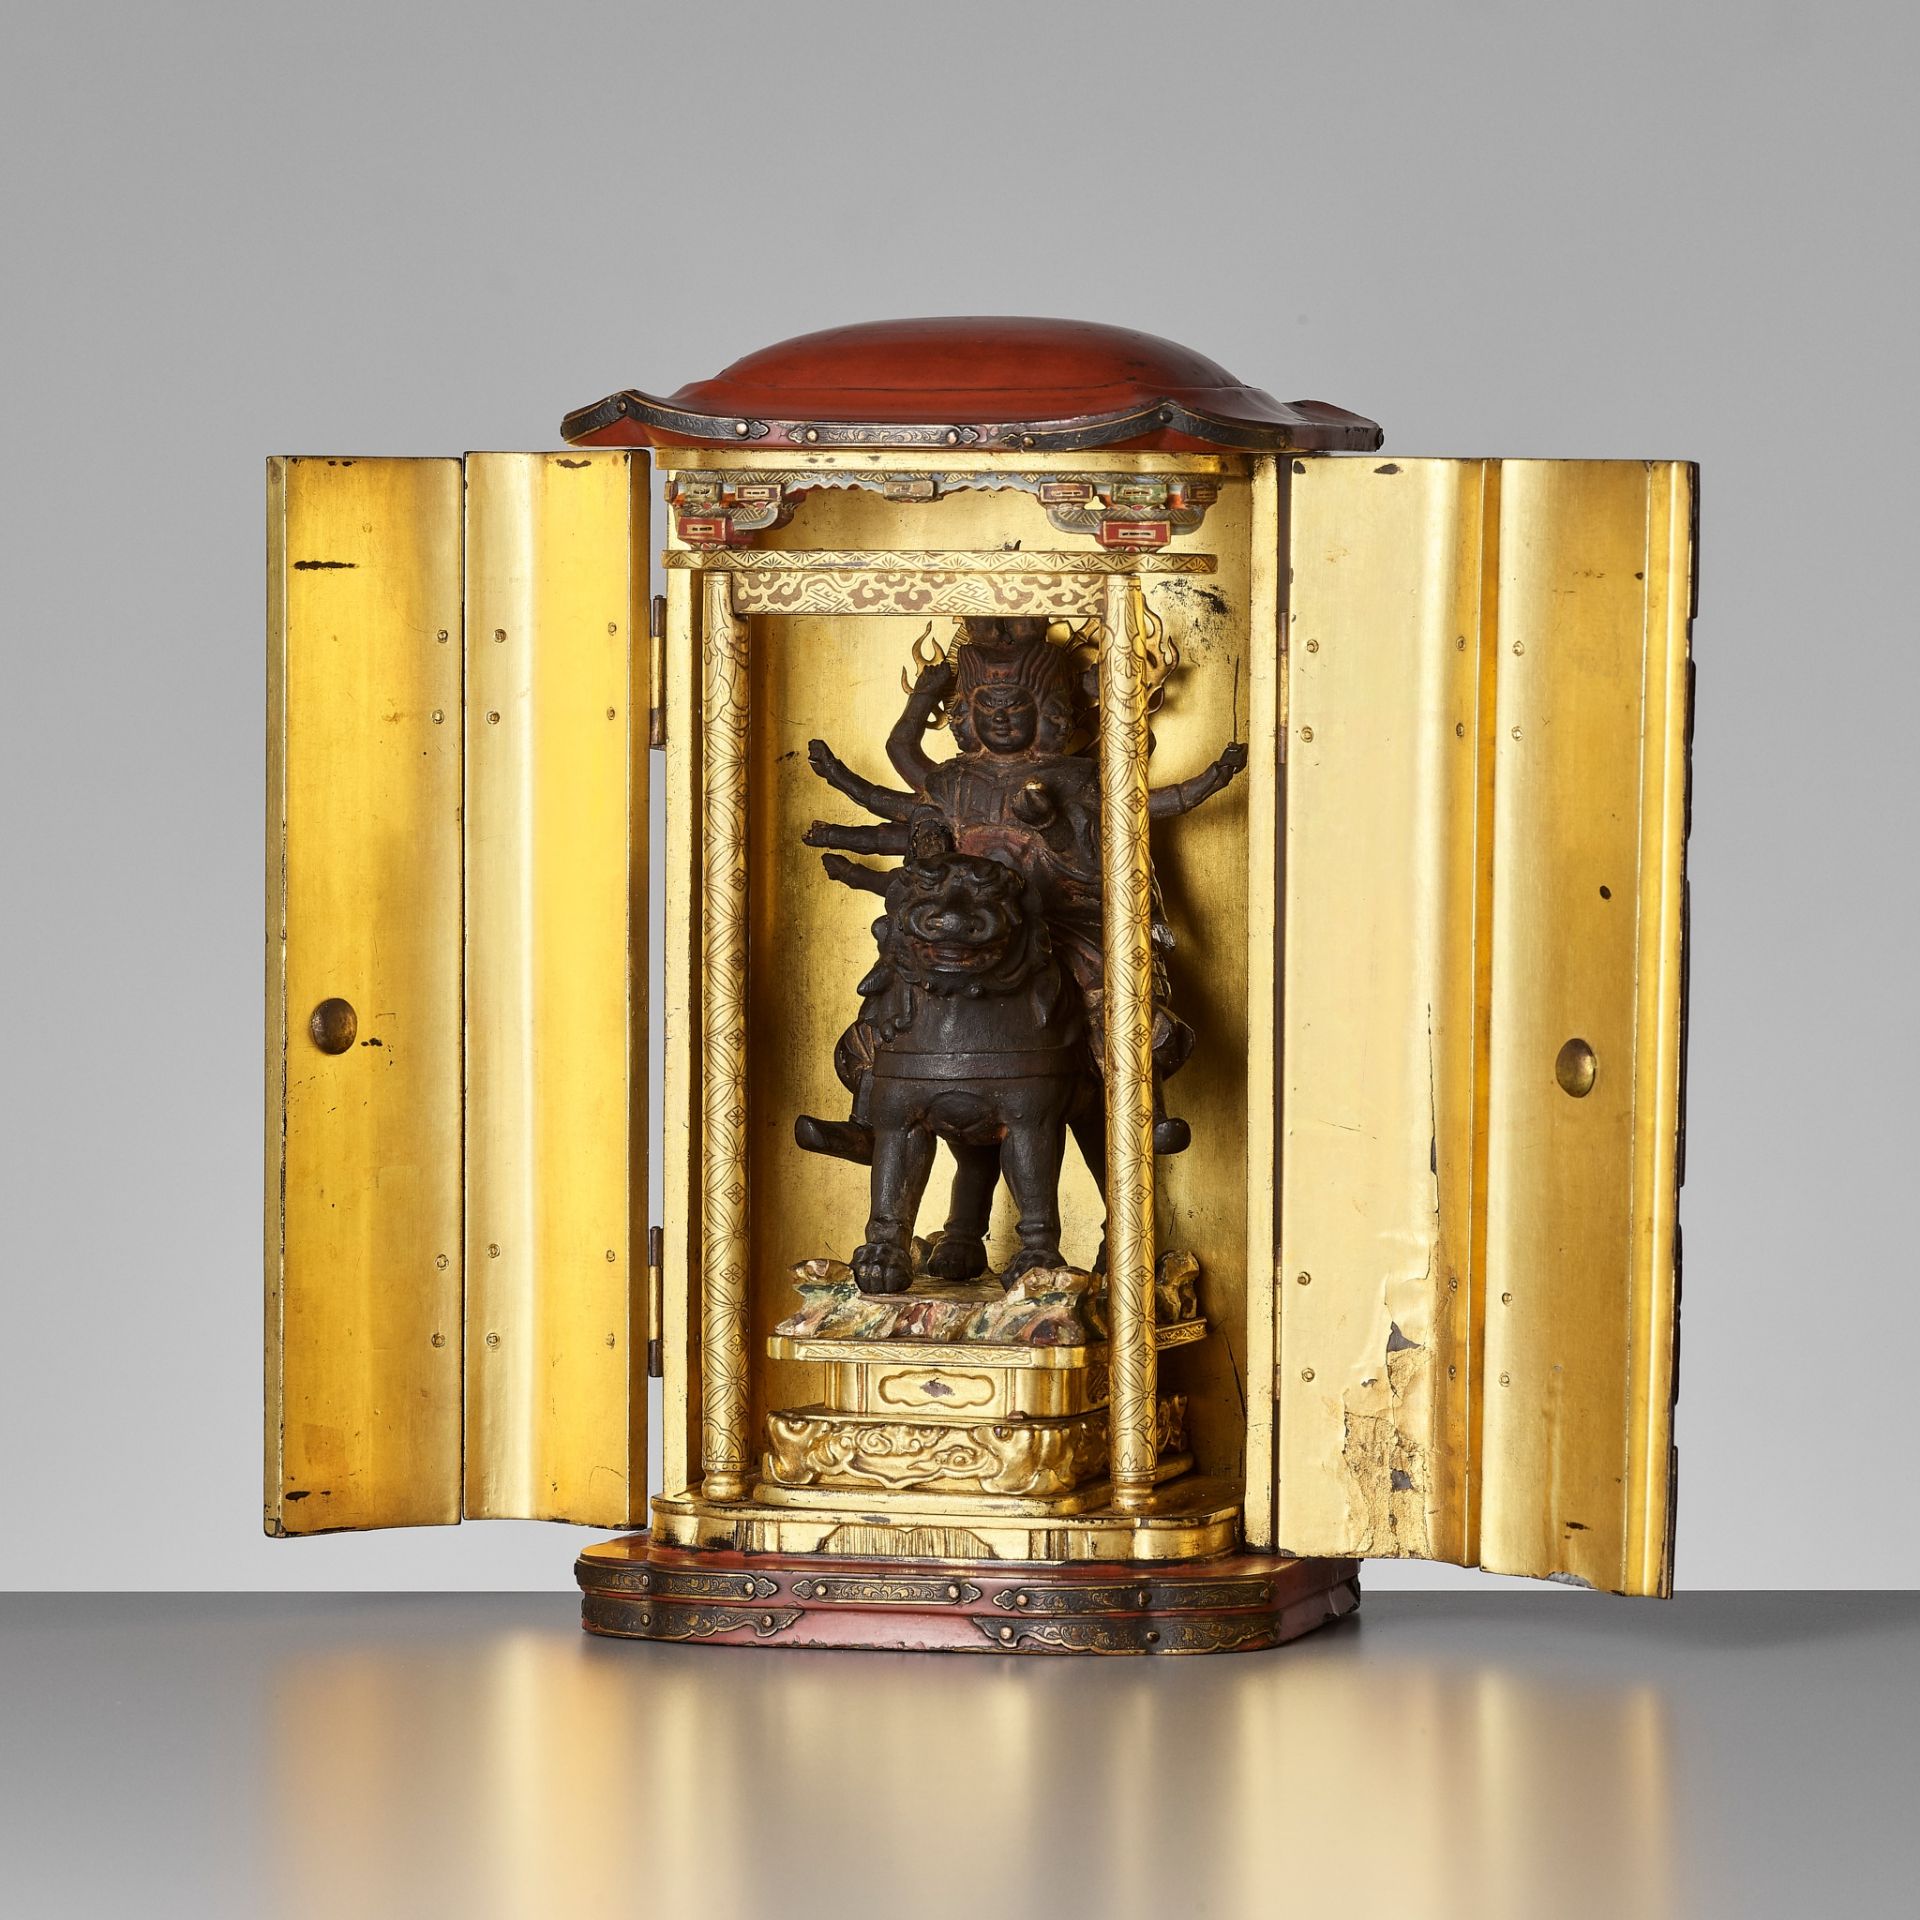 A GILT AND LACQUERED WOOD ZUSHI CONTAINING A LACQUERED WOOD FIGURE OF TOBATSU BISHAMONTEN - Image 8 of 13